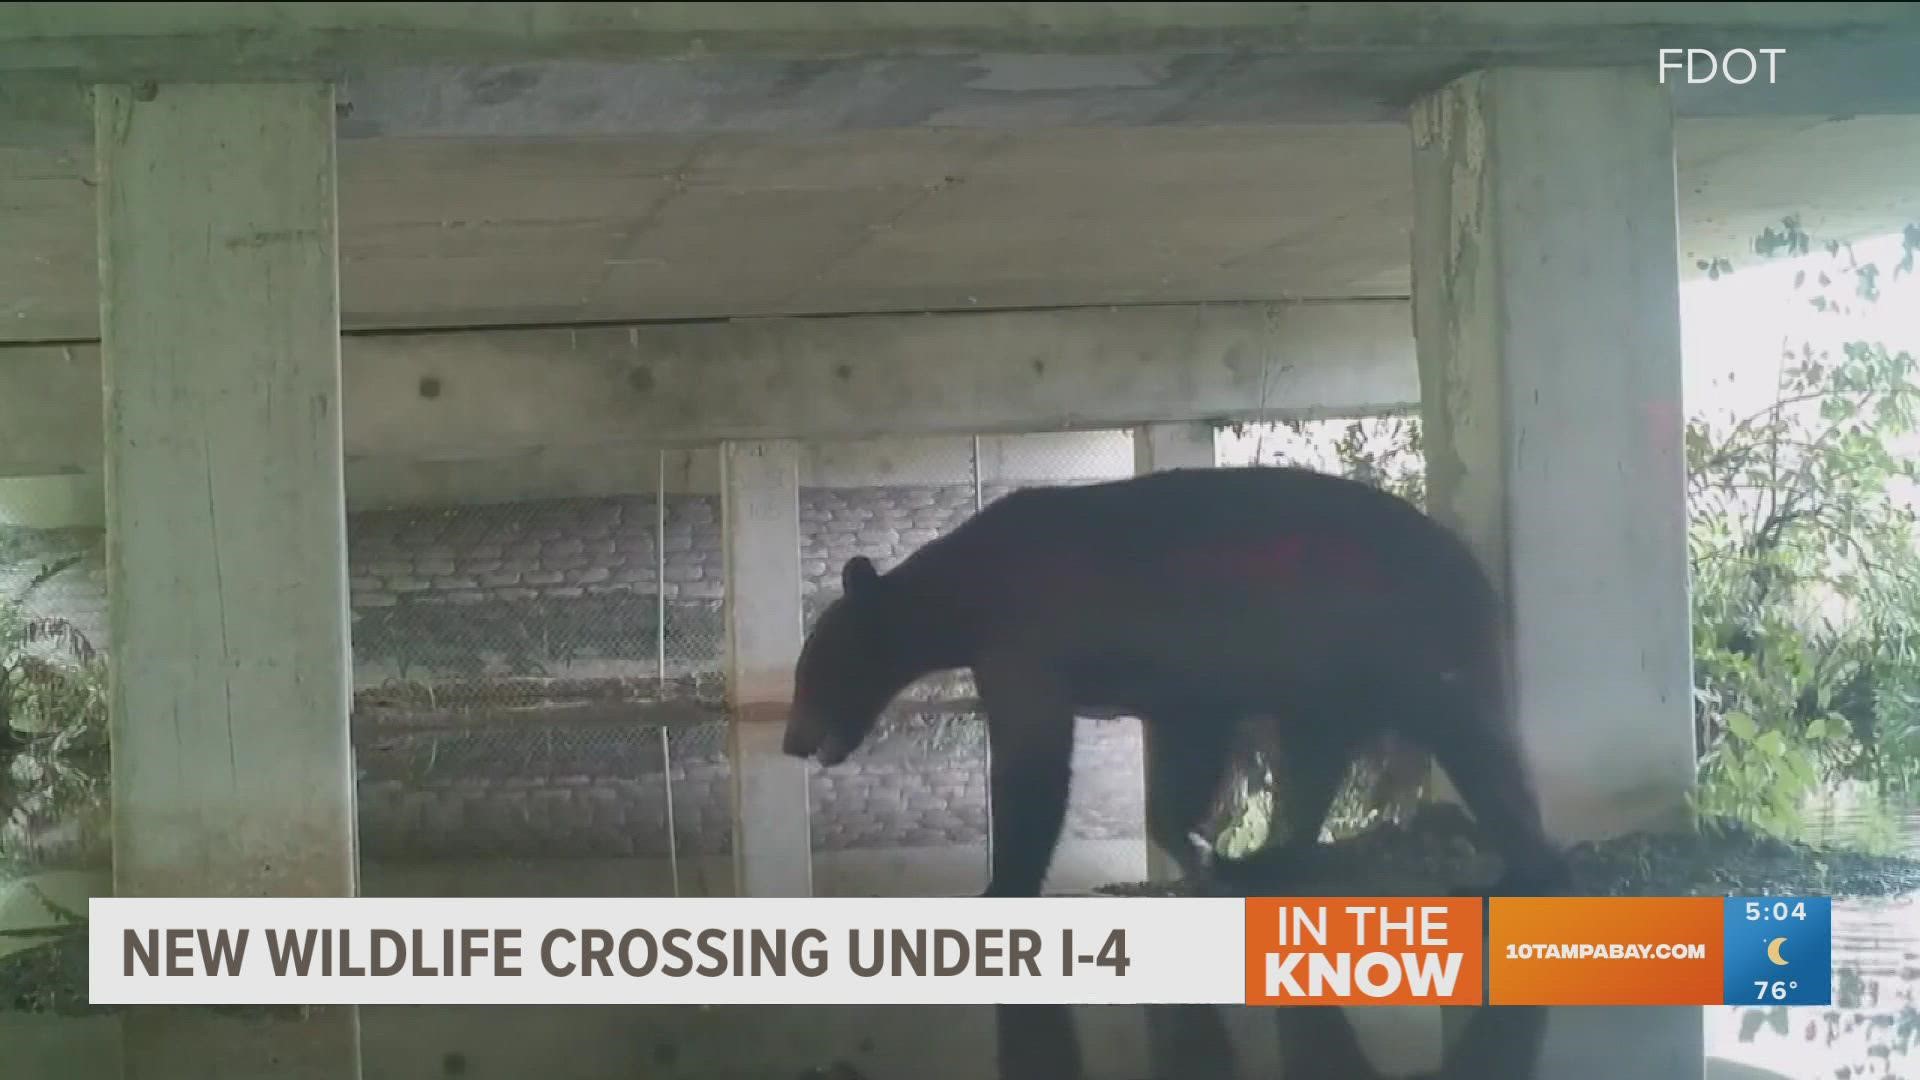 The crossing lets animals like panthers, bears and deer stay safe by going under major roadways.